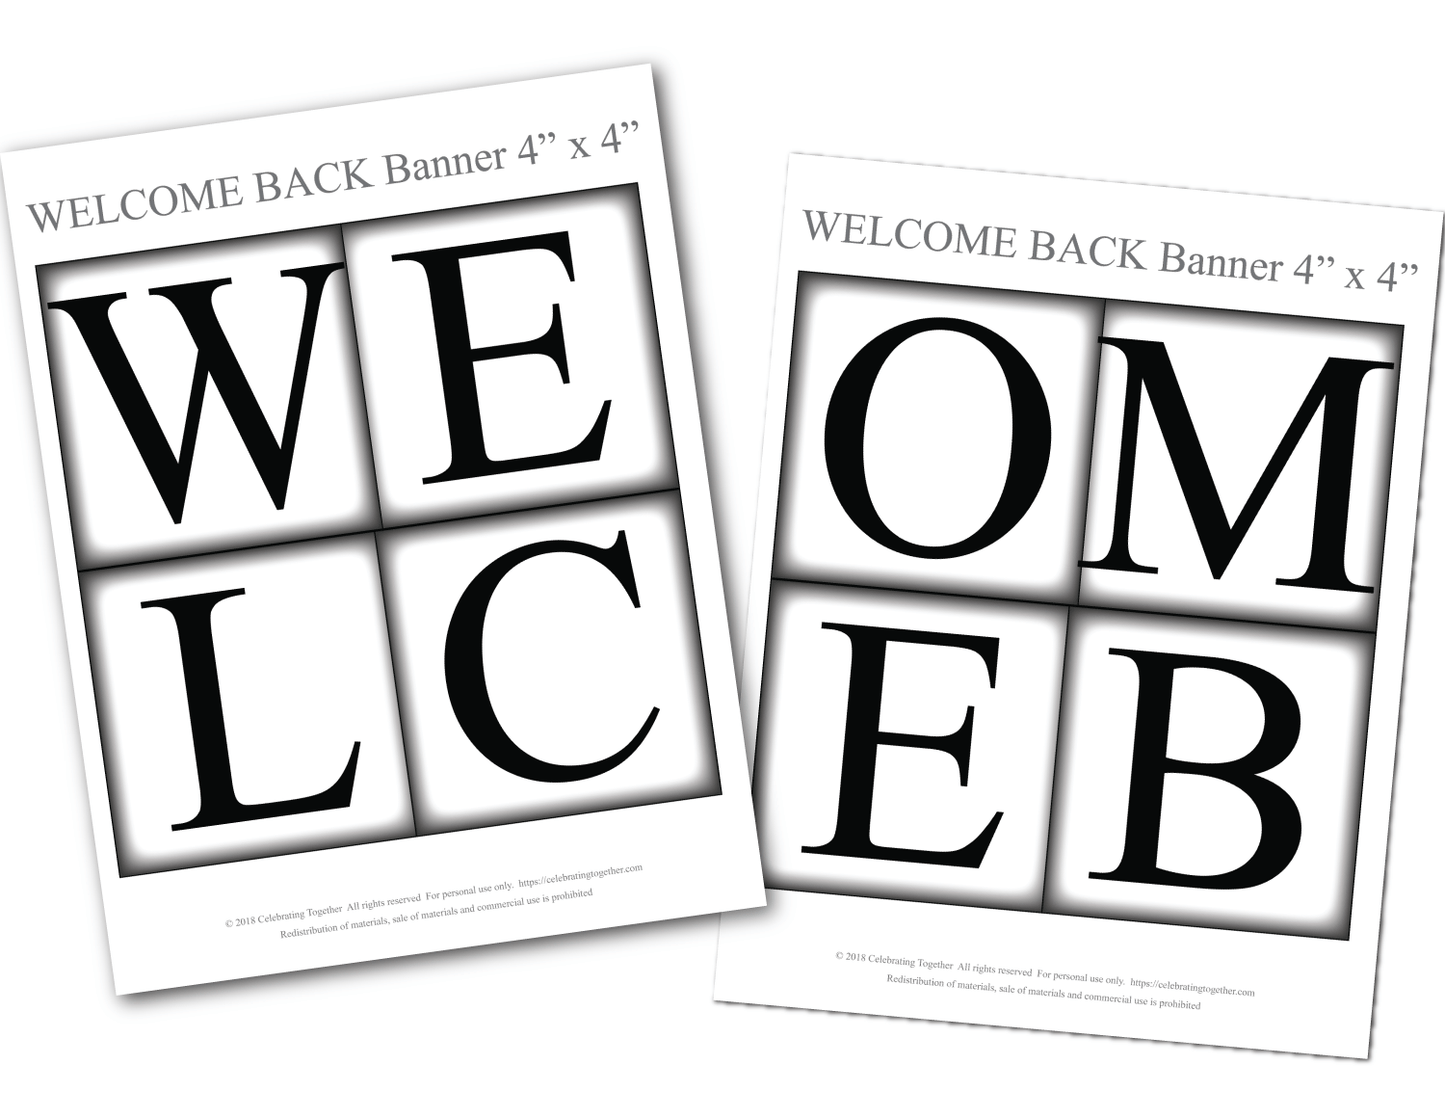 Printable pages for welcome banner - Celebrating Together